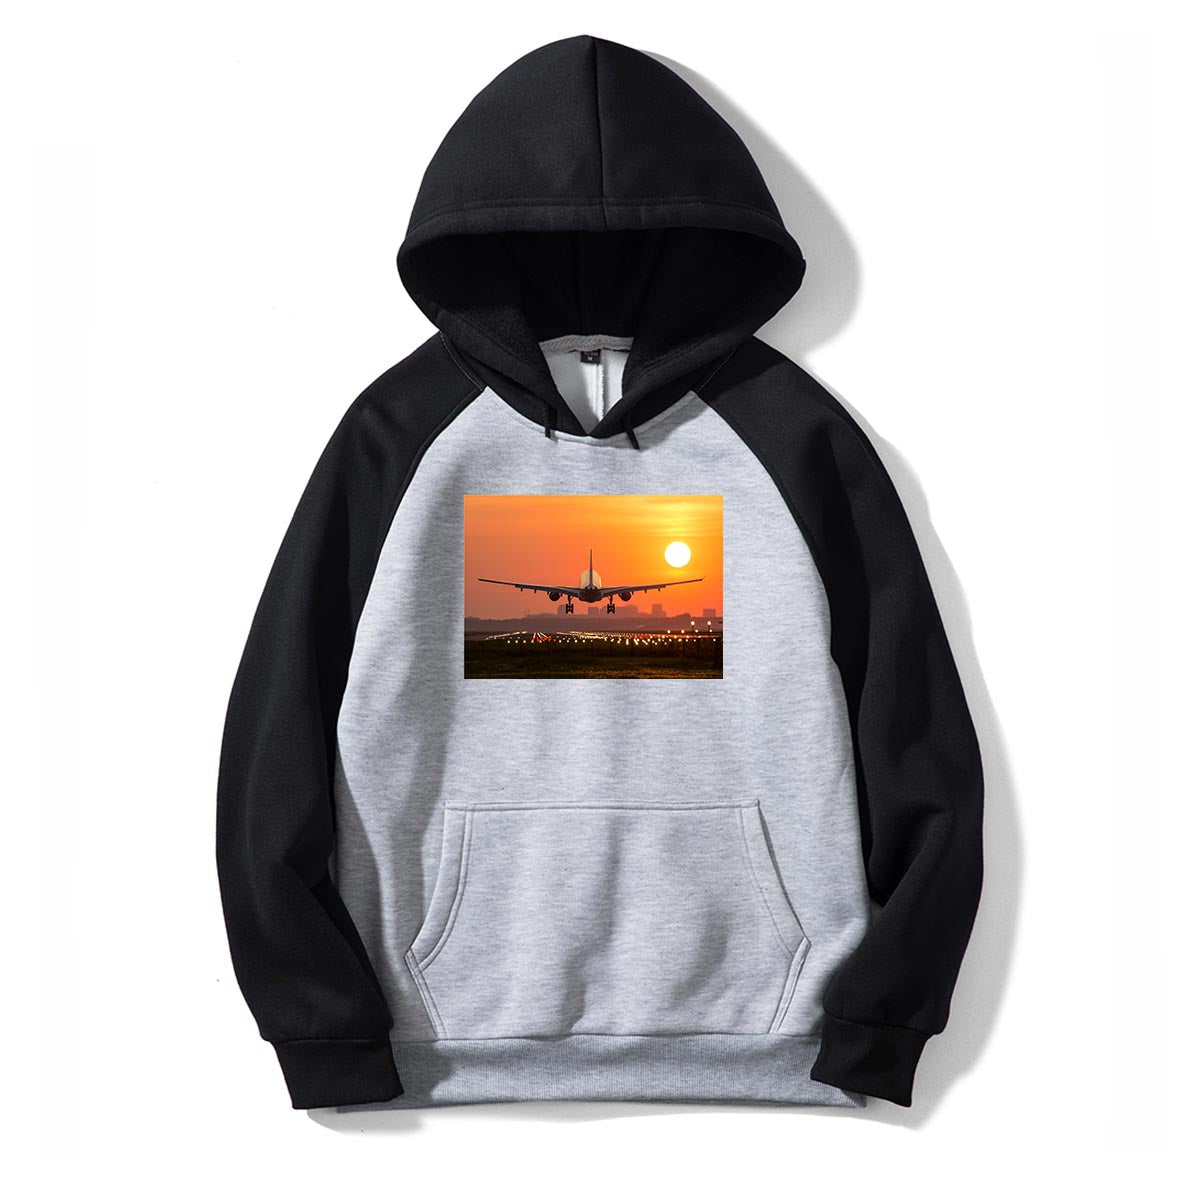 Amazing Airbus A330 Landing at Sunset Designed Colourful Hoodies